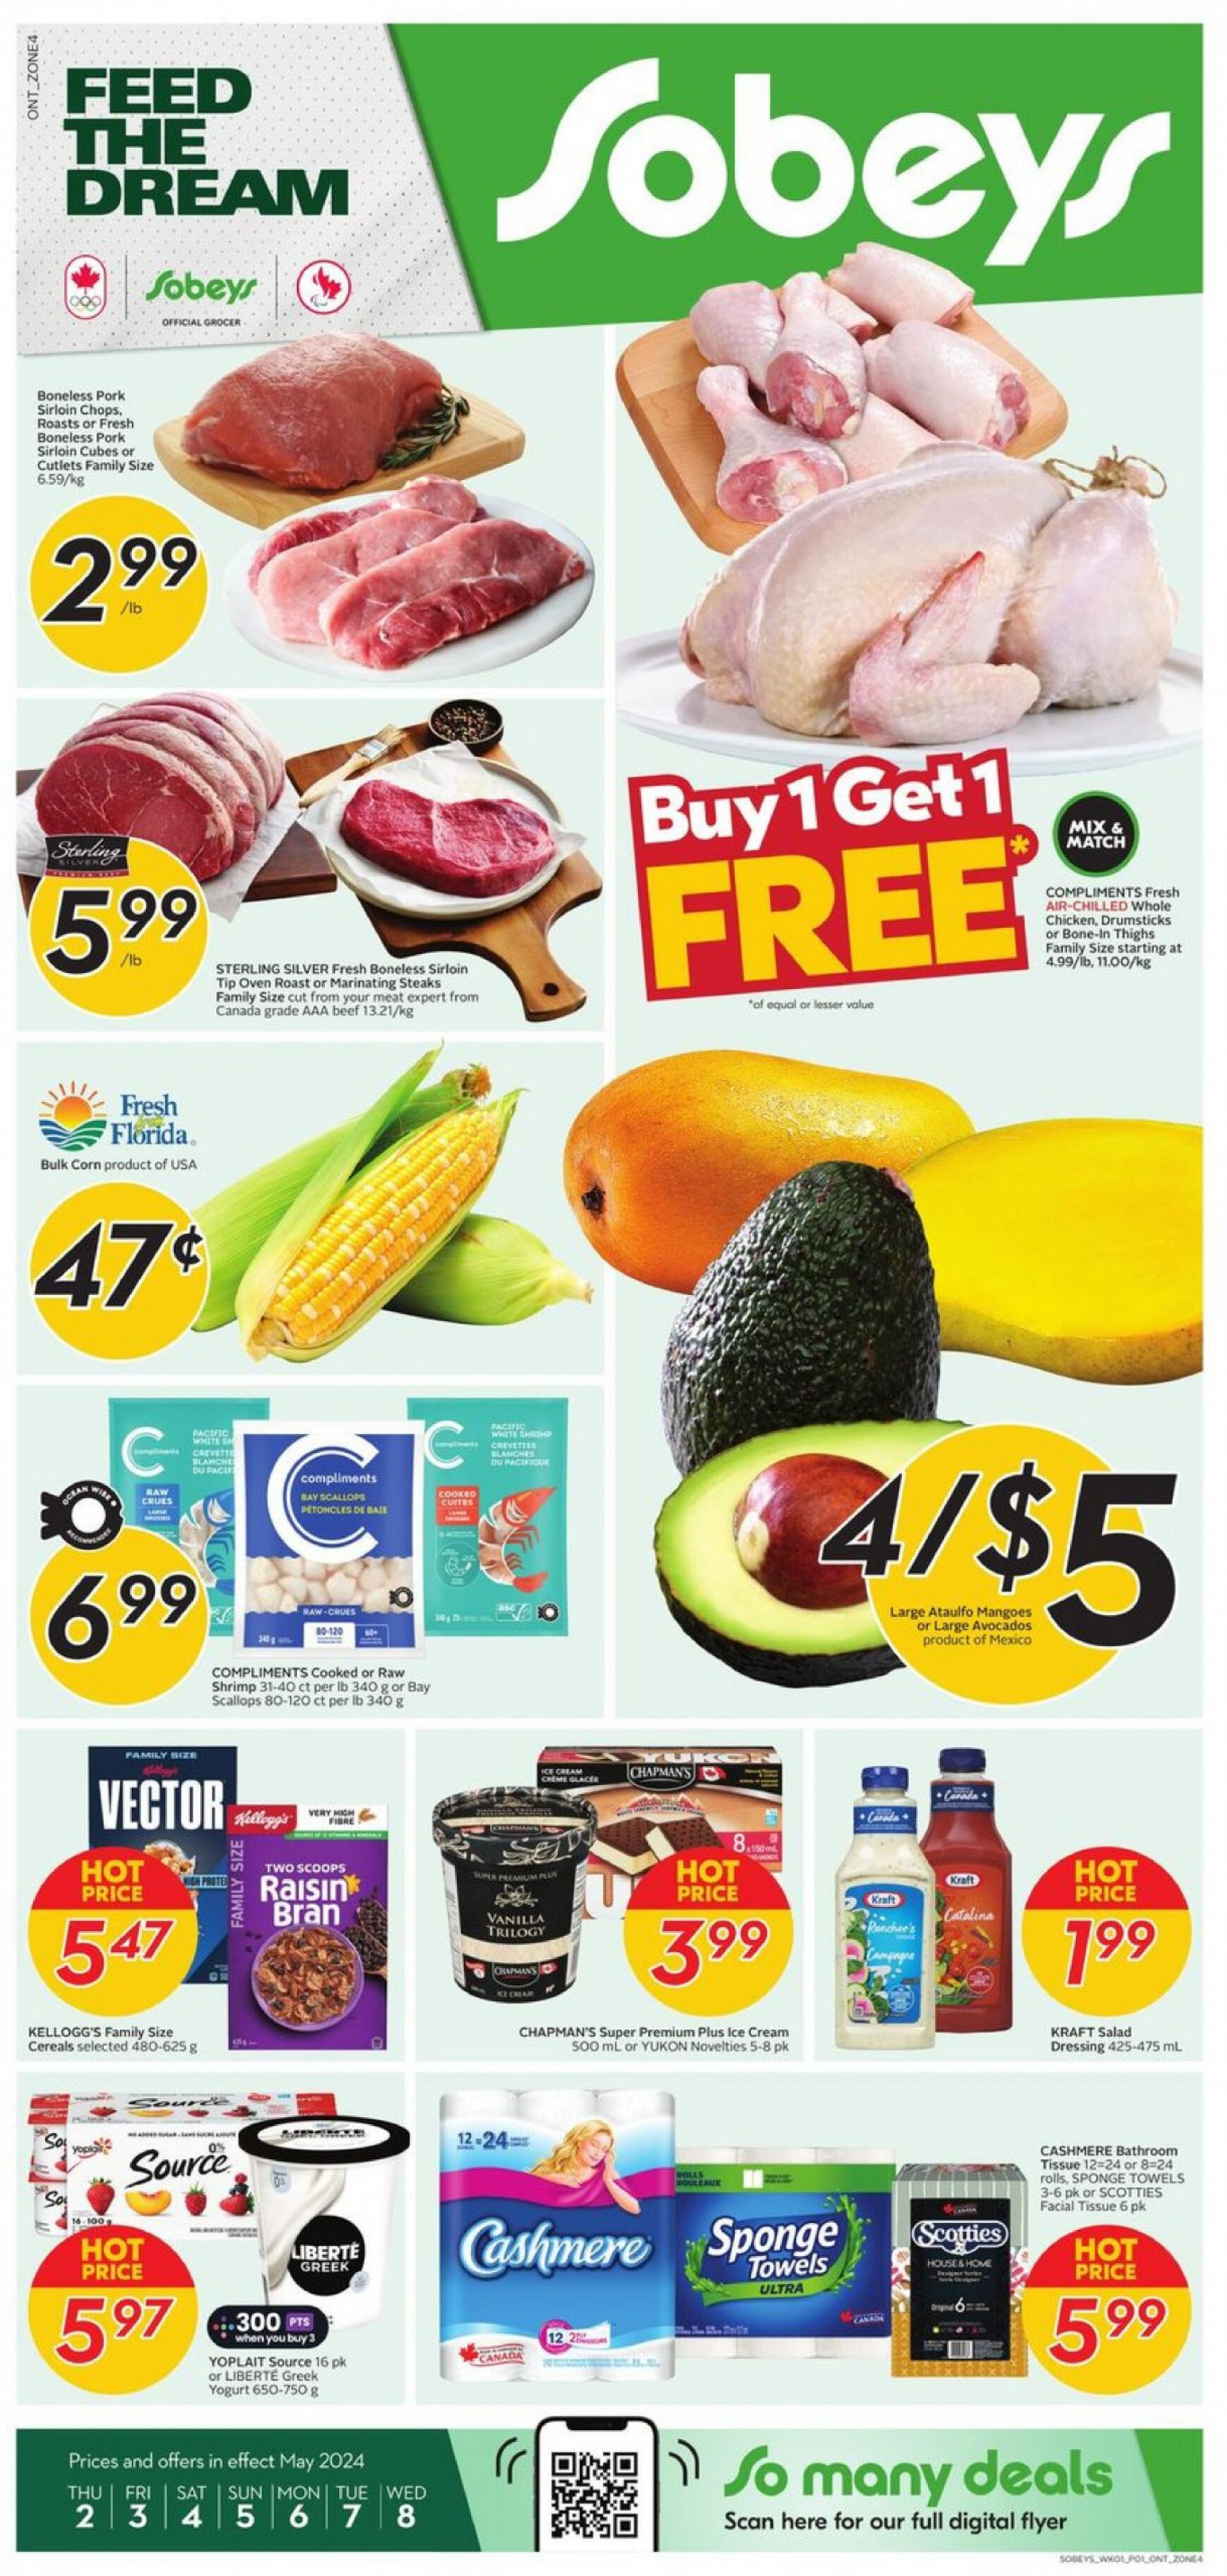 sobeys - Sobeys - Weekly Flyer - Ontario flyer current 02.05. - 08.05. - page: 1